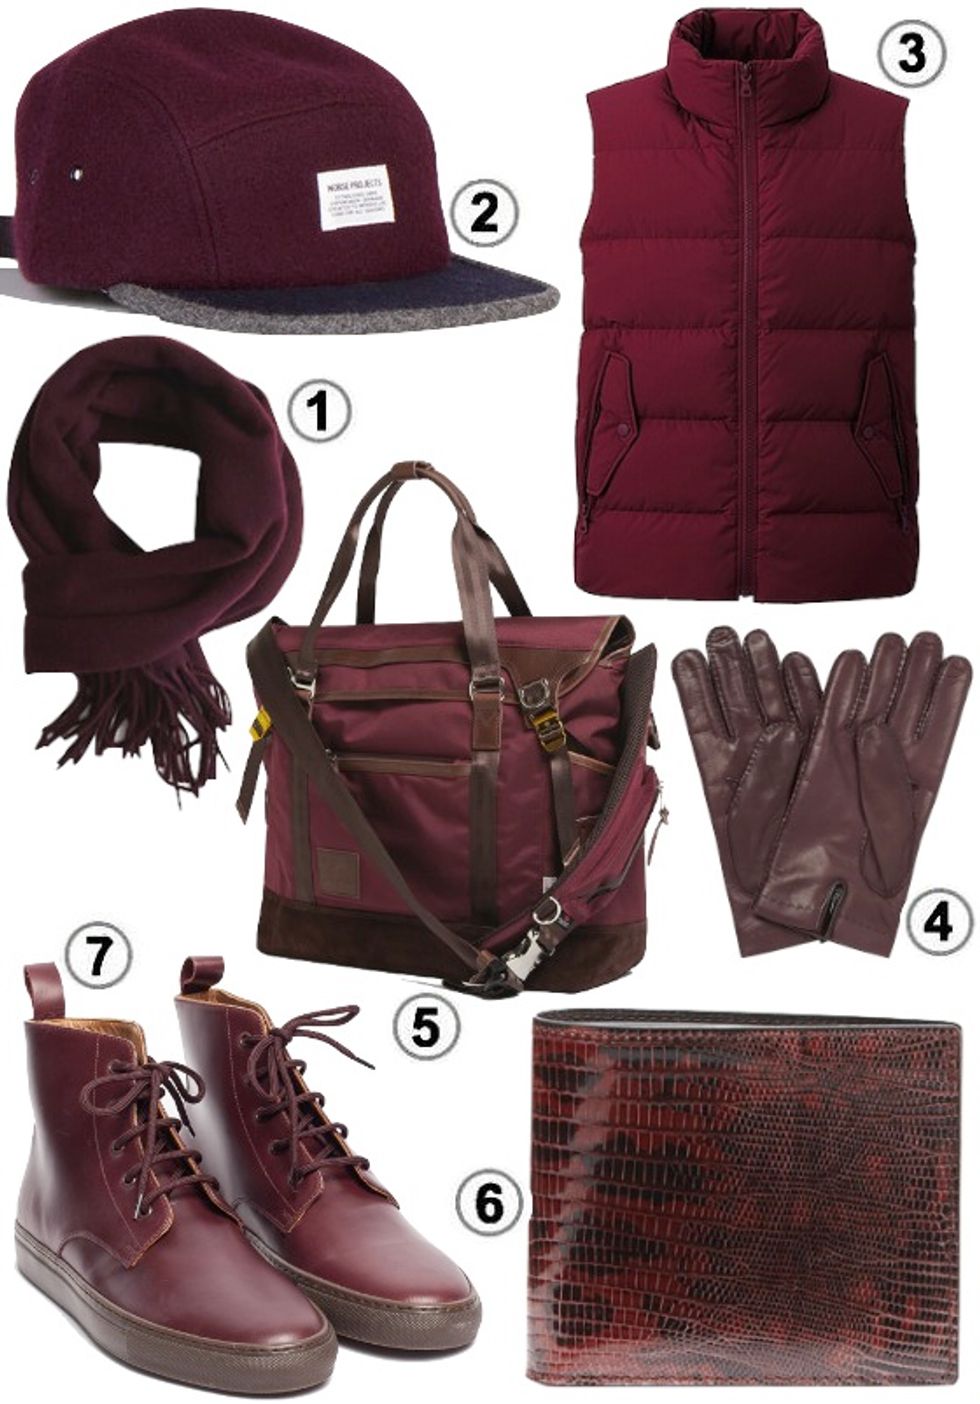 Look of the Week: Cabernet Crush